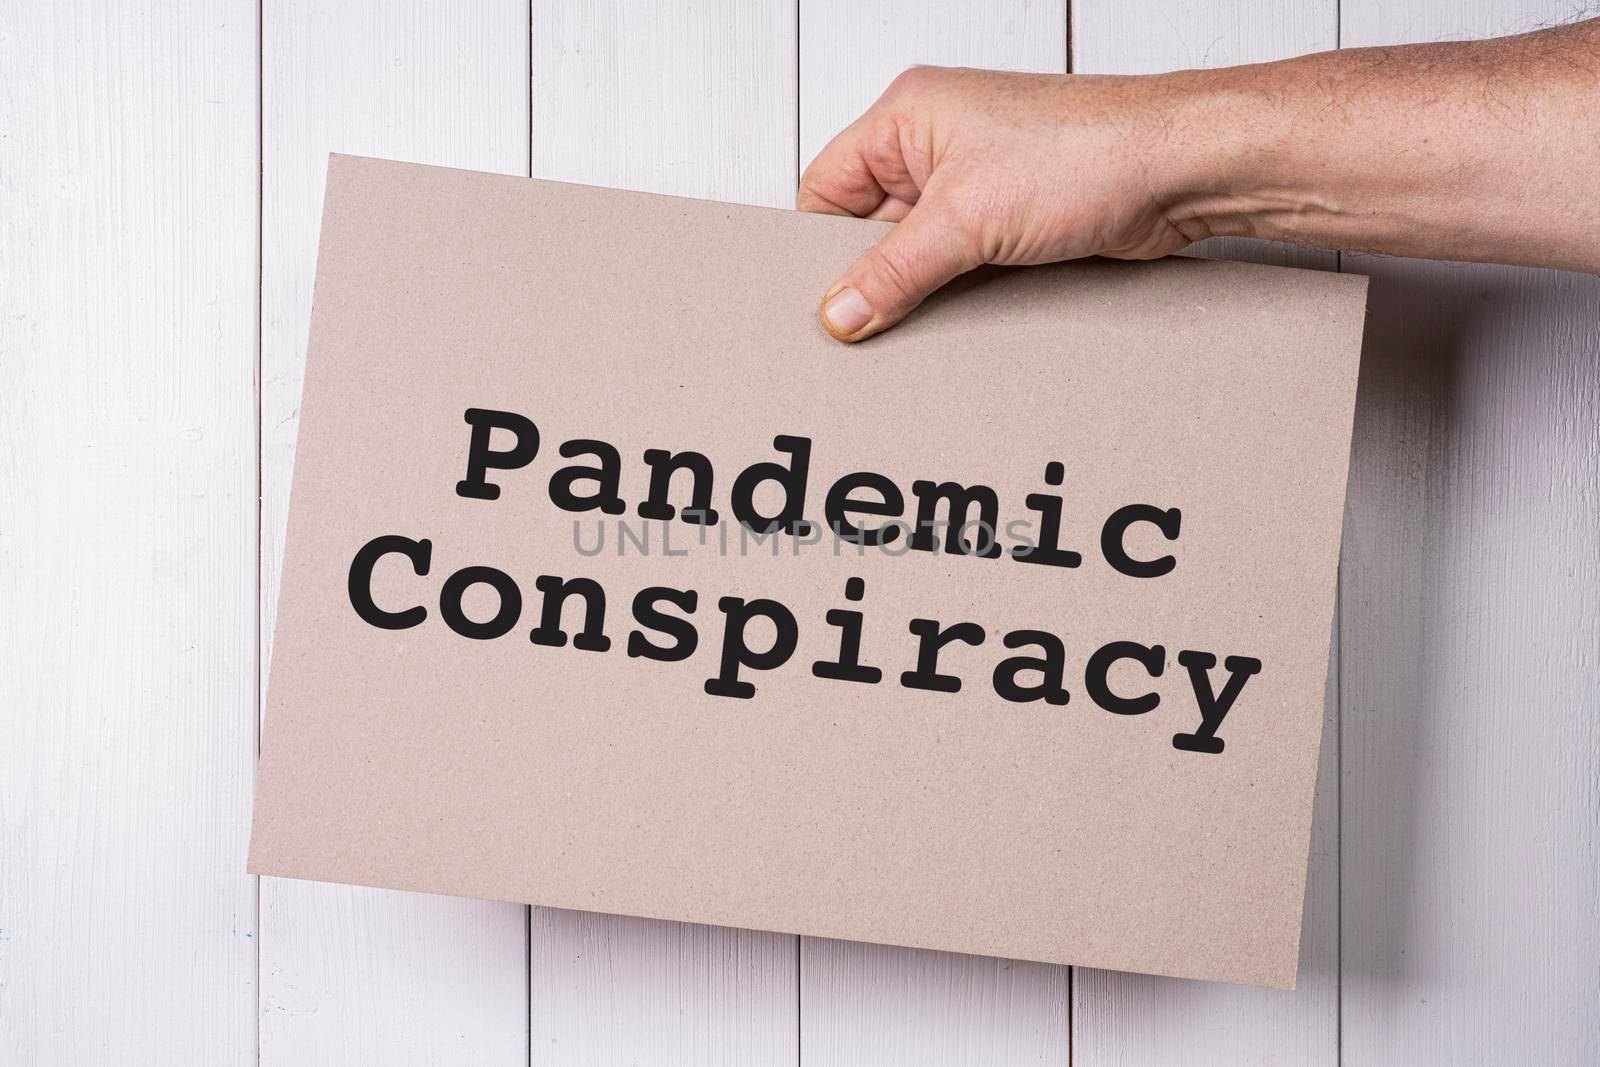 a sign with the words Pandemic conspiracy held in the hand